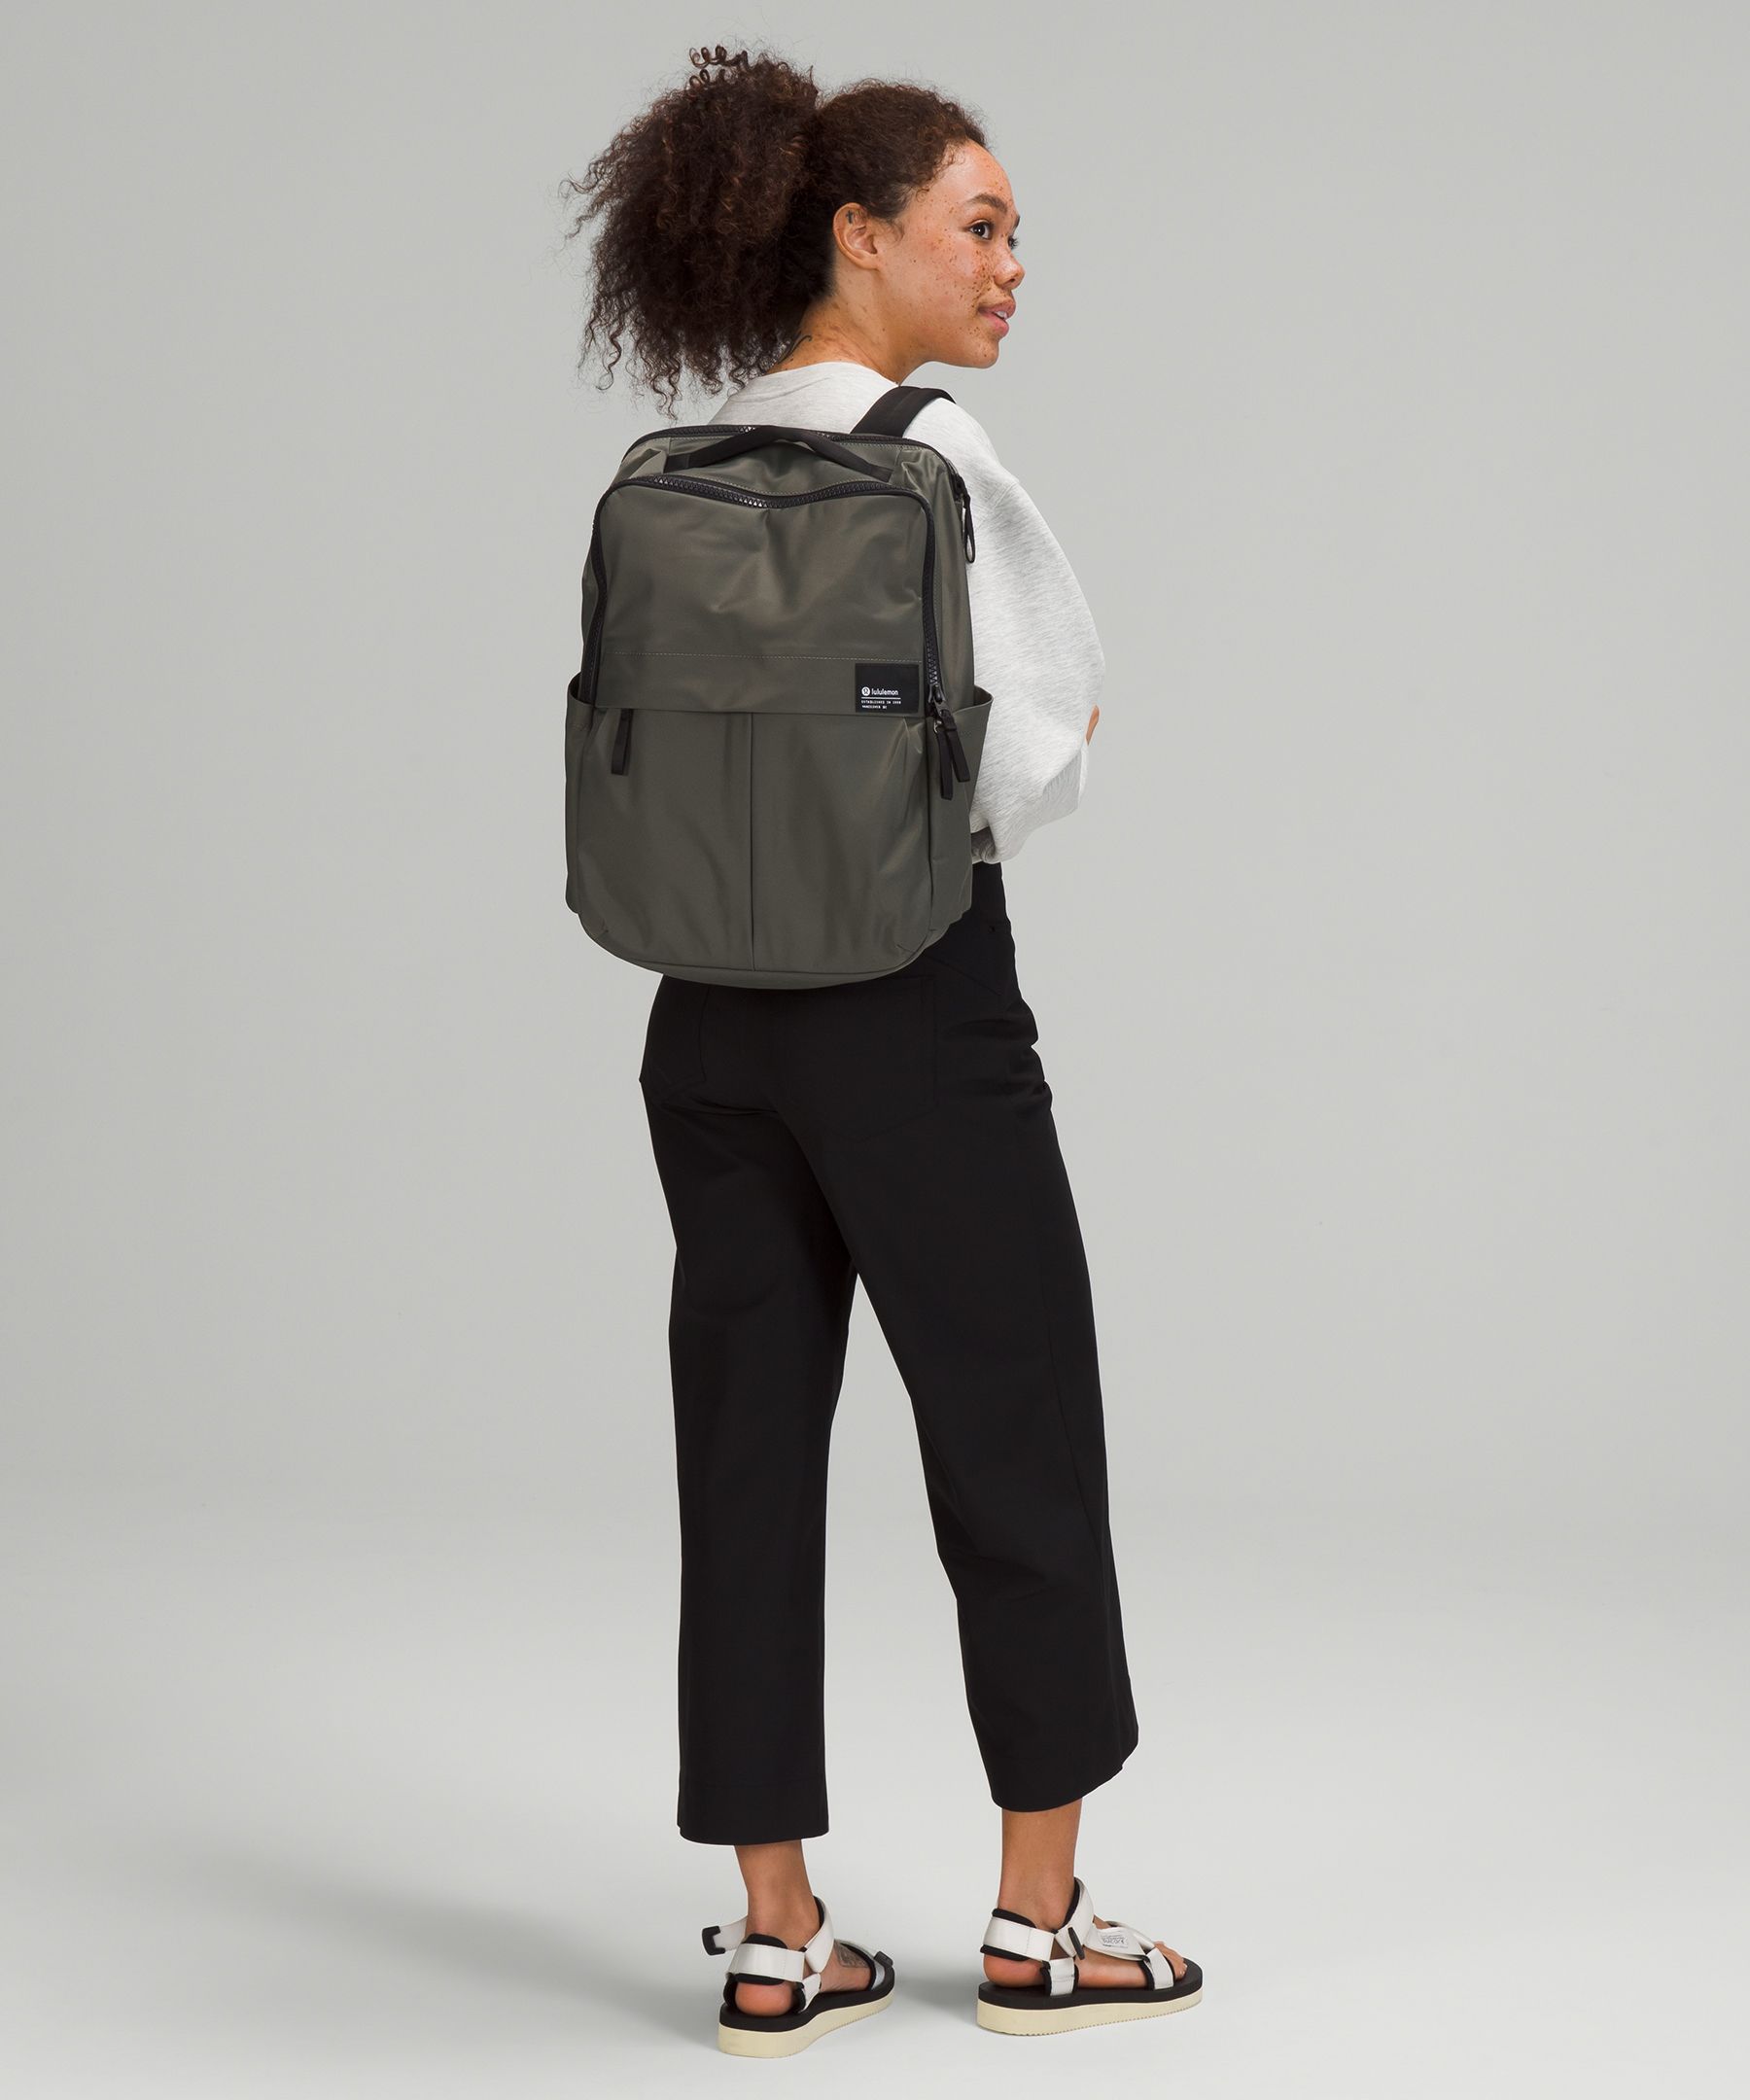 Lululemon On The Move Everyday Backpack Review